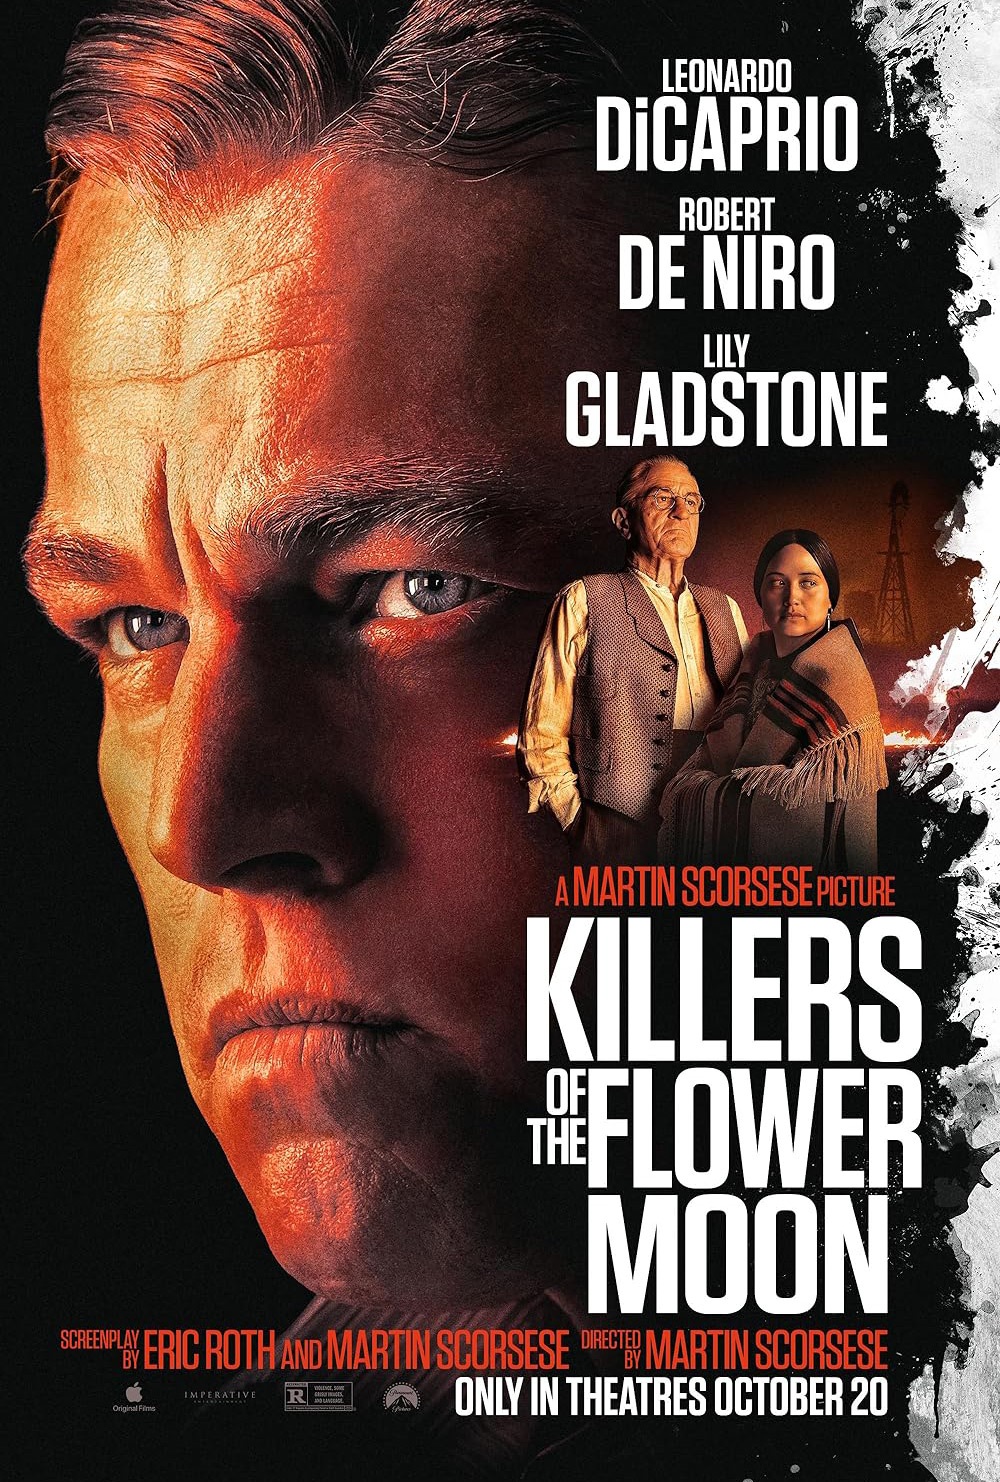 Killers of the Flower Moon film poster